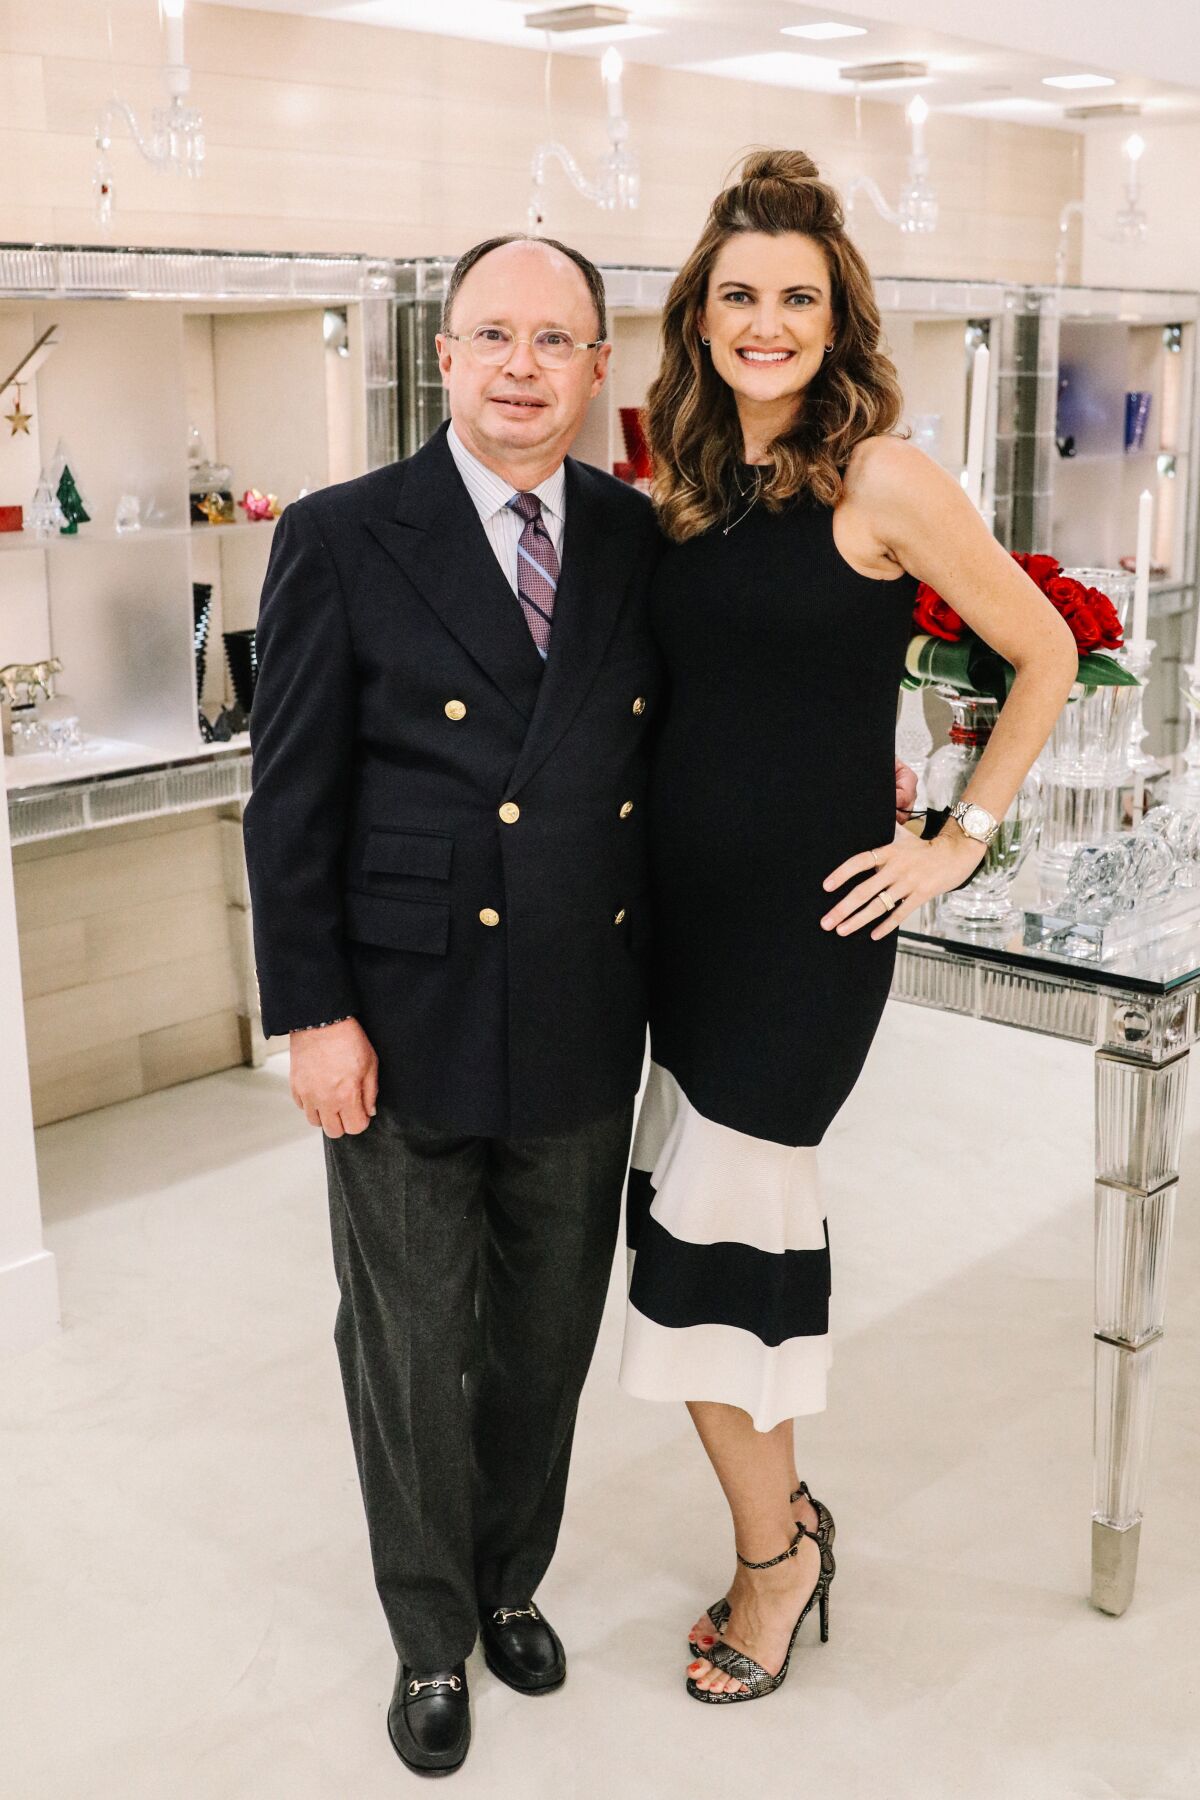 Baccarat boutique director Torrey Obray and VP of sales for Baccarat Sally Burnside.